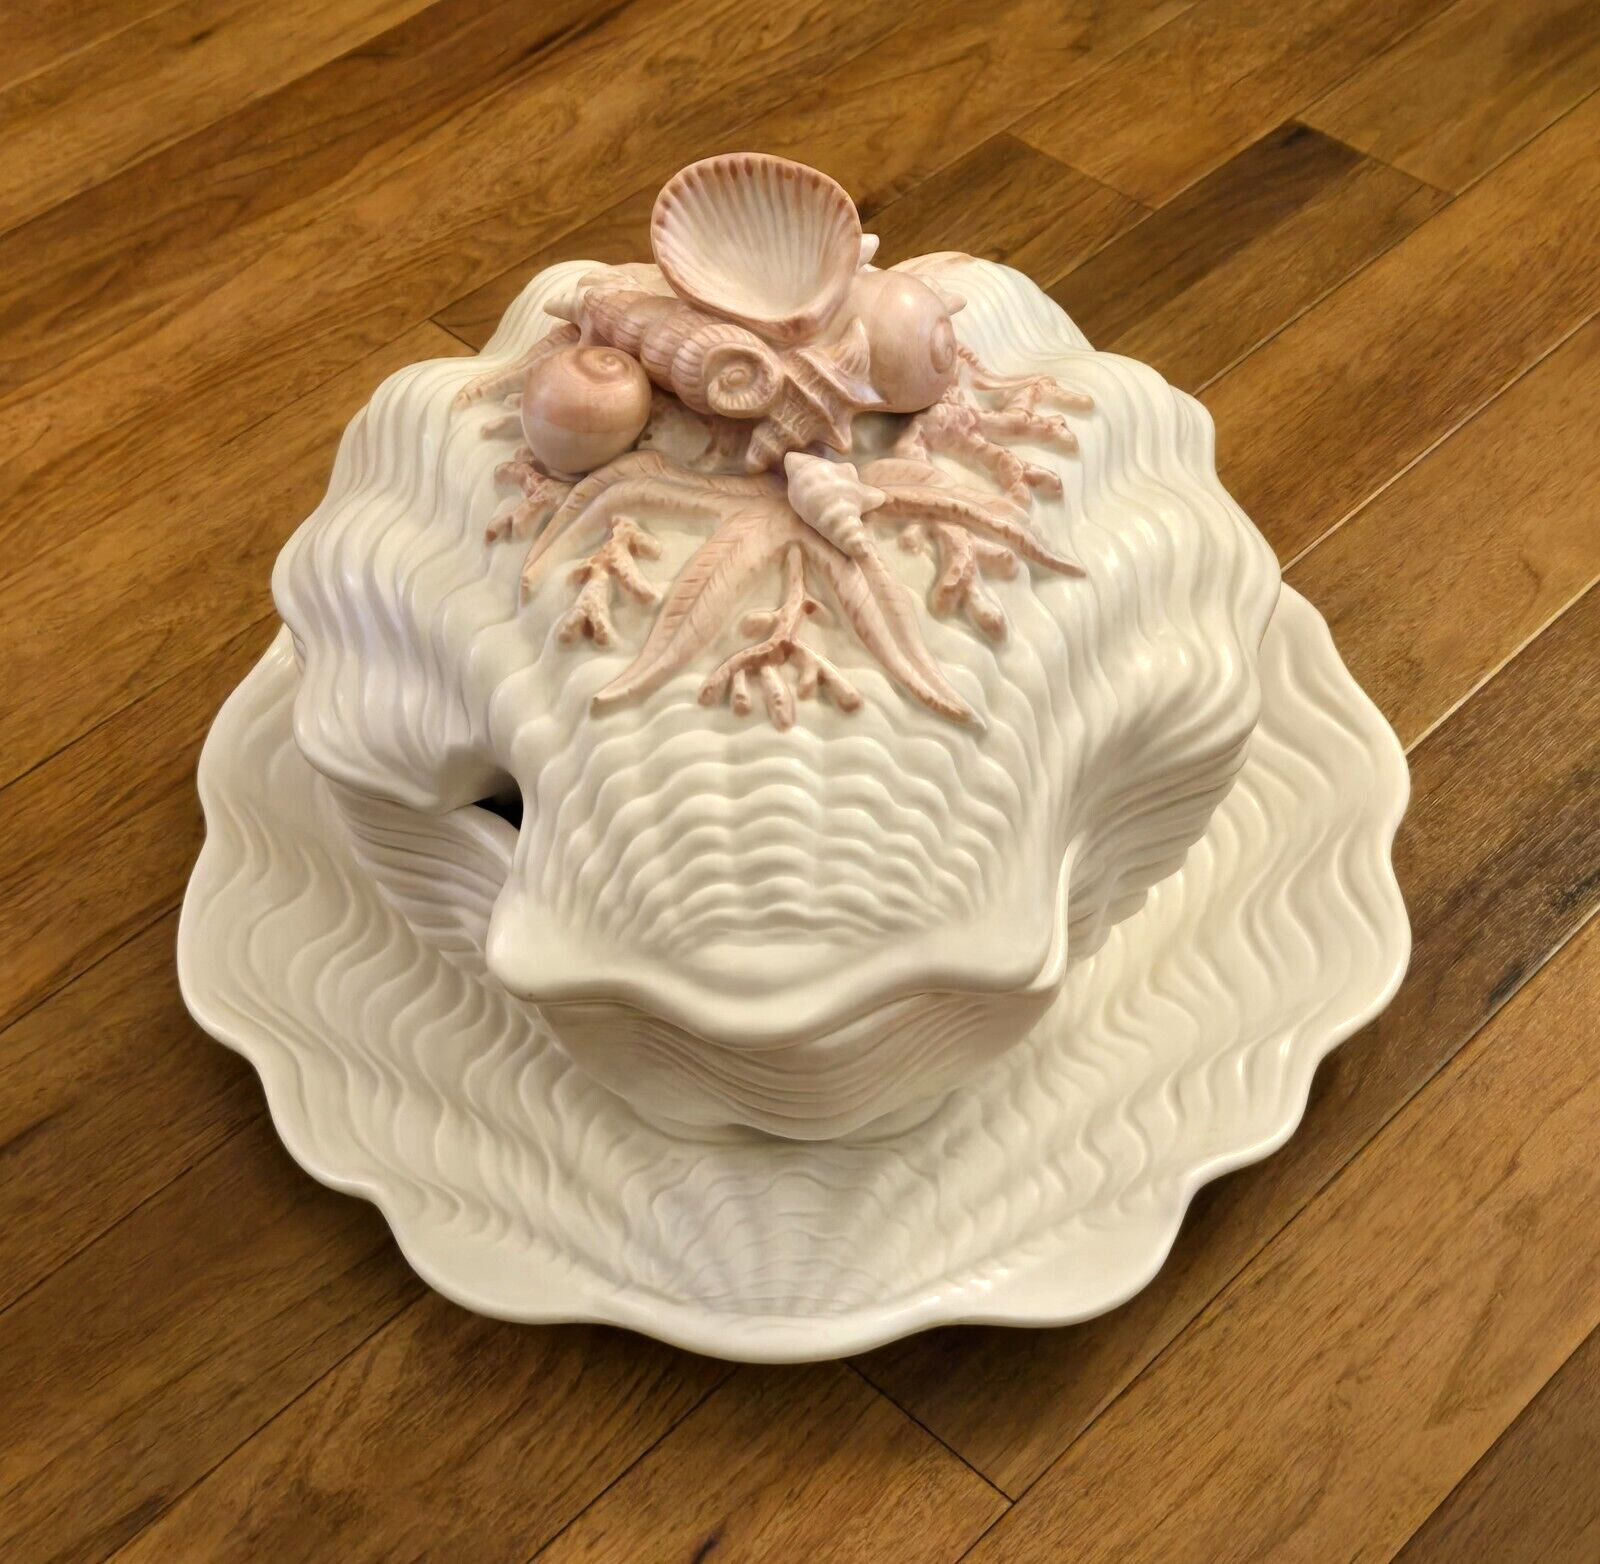 Vintage Fitz and Floyd Coquille Tureen & Underplate White Pink Crustacean Shell